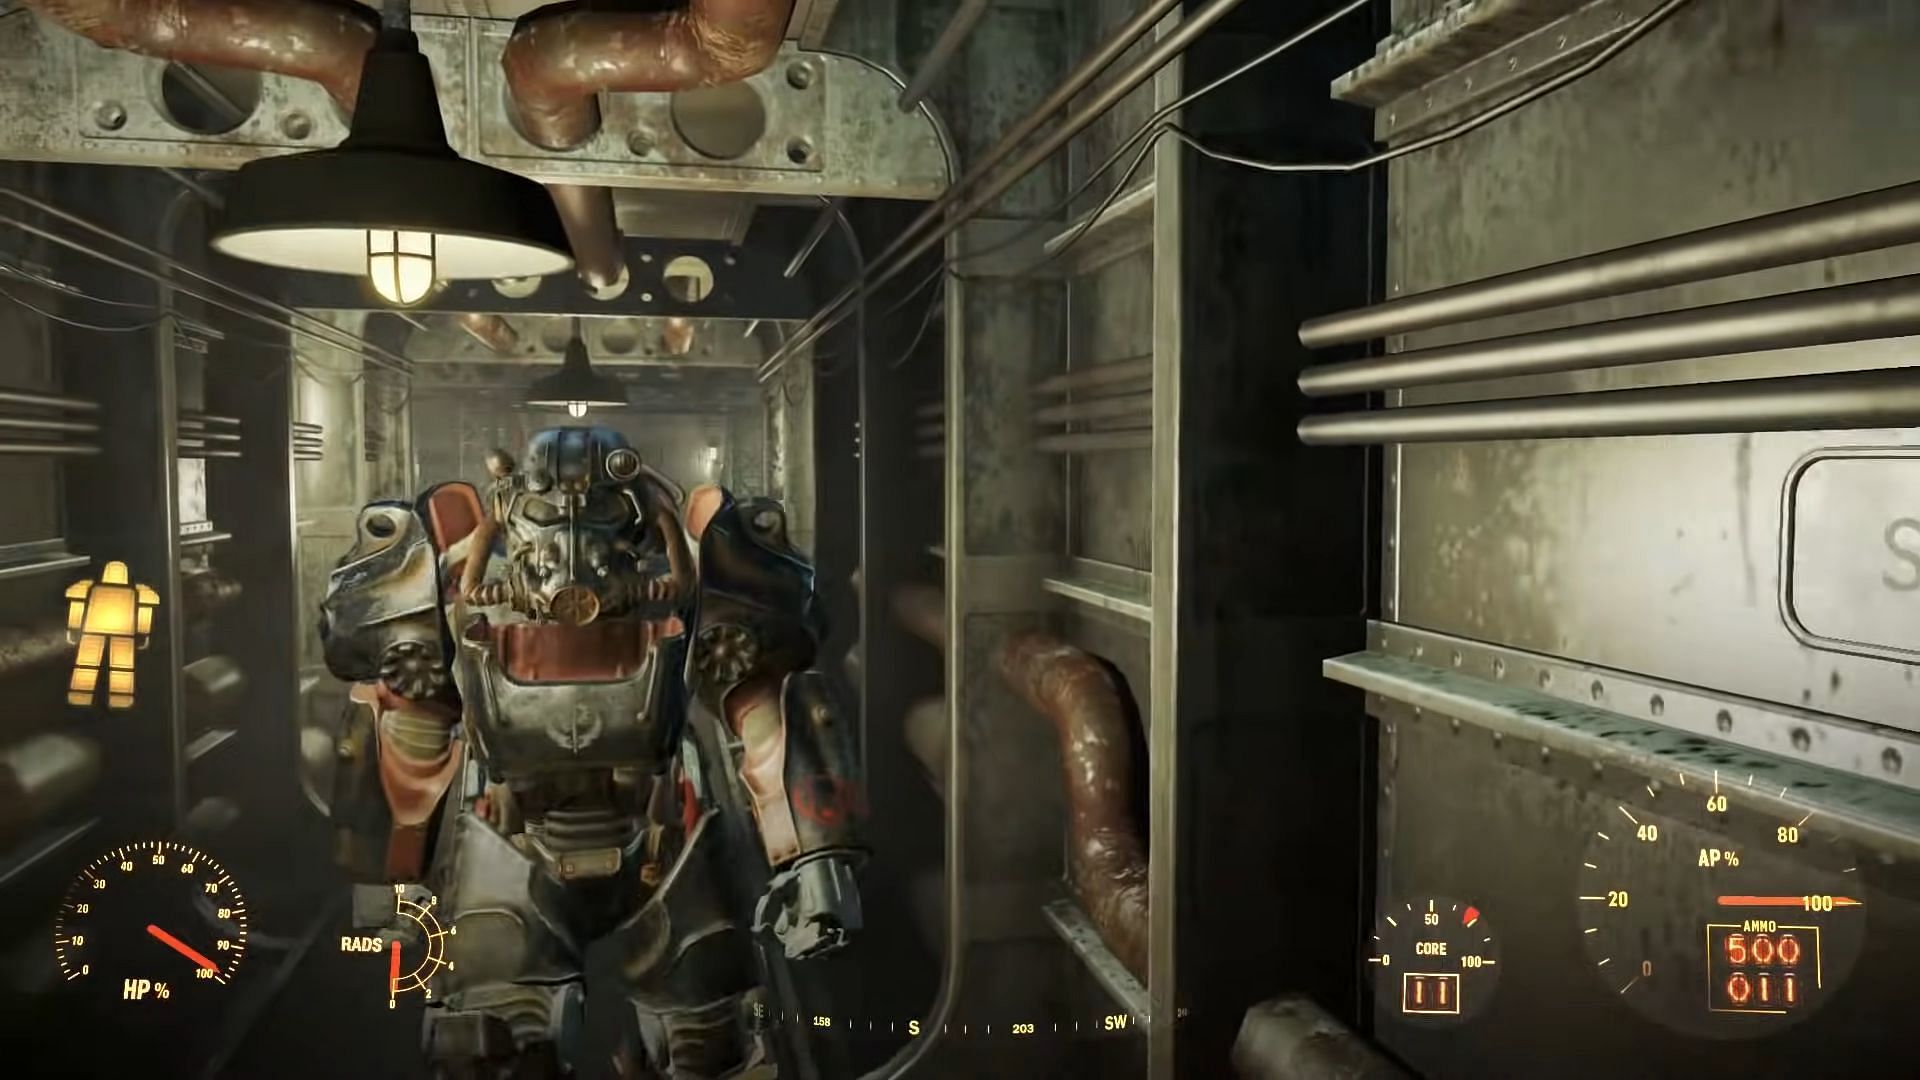 Power Armor in Fallout 4 (Image via Bethesda Softworks)